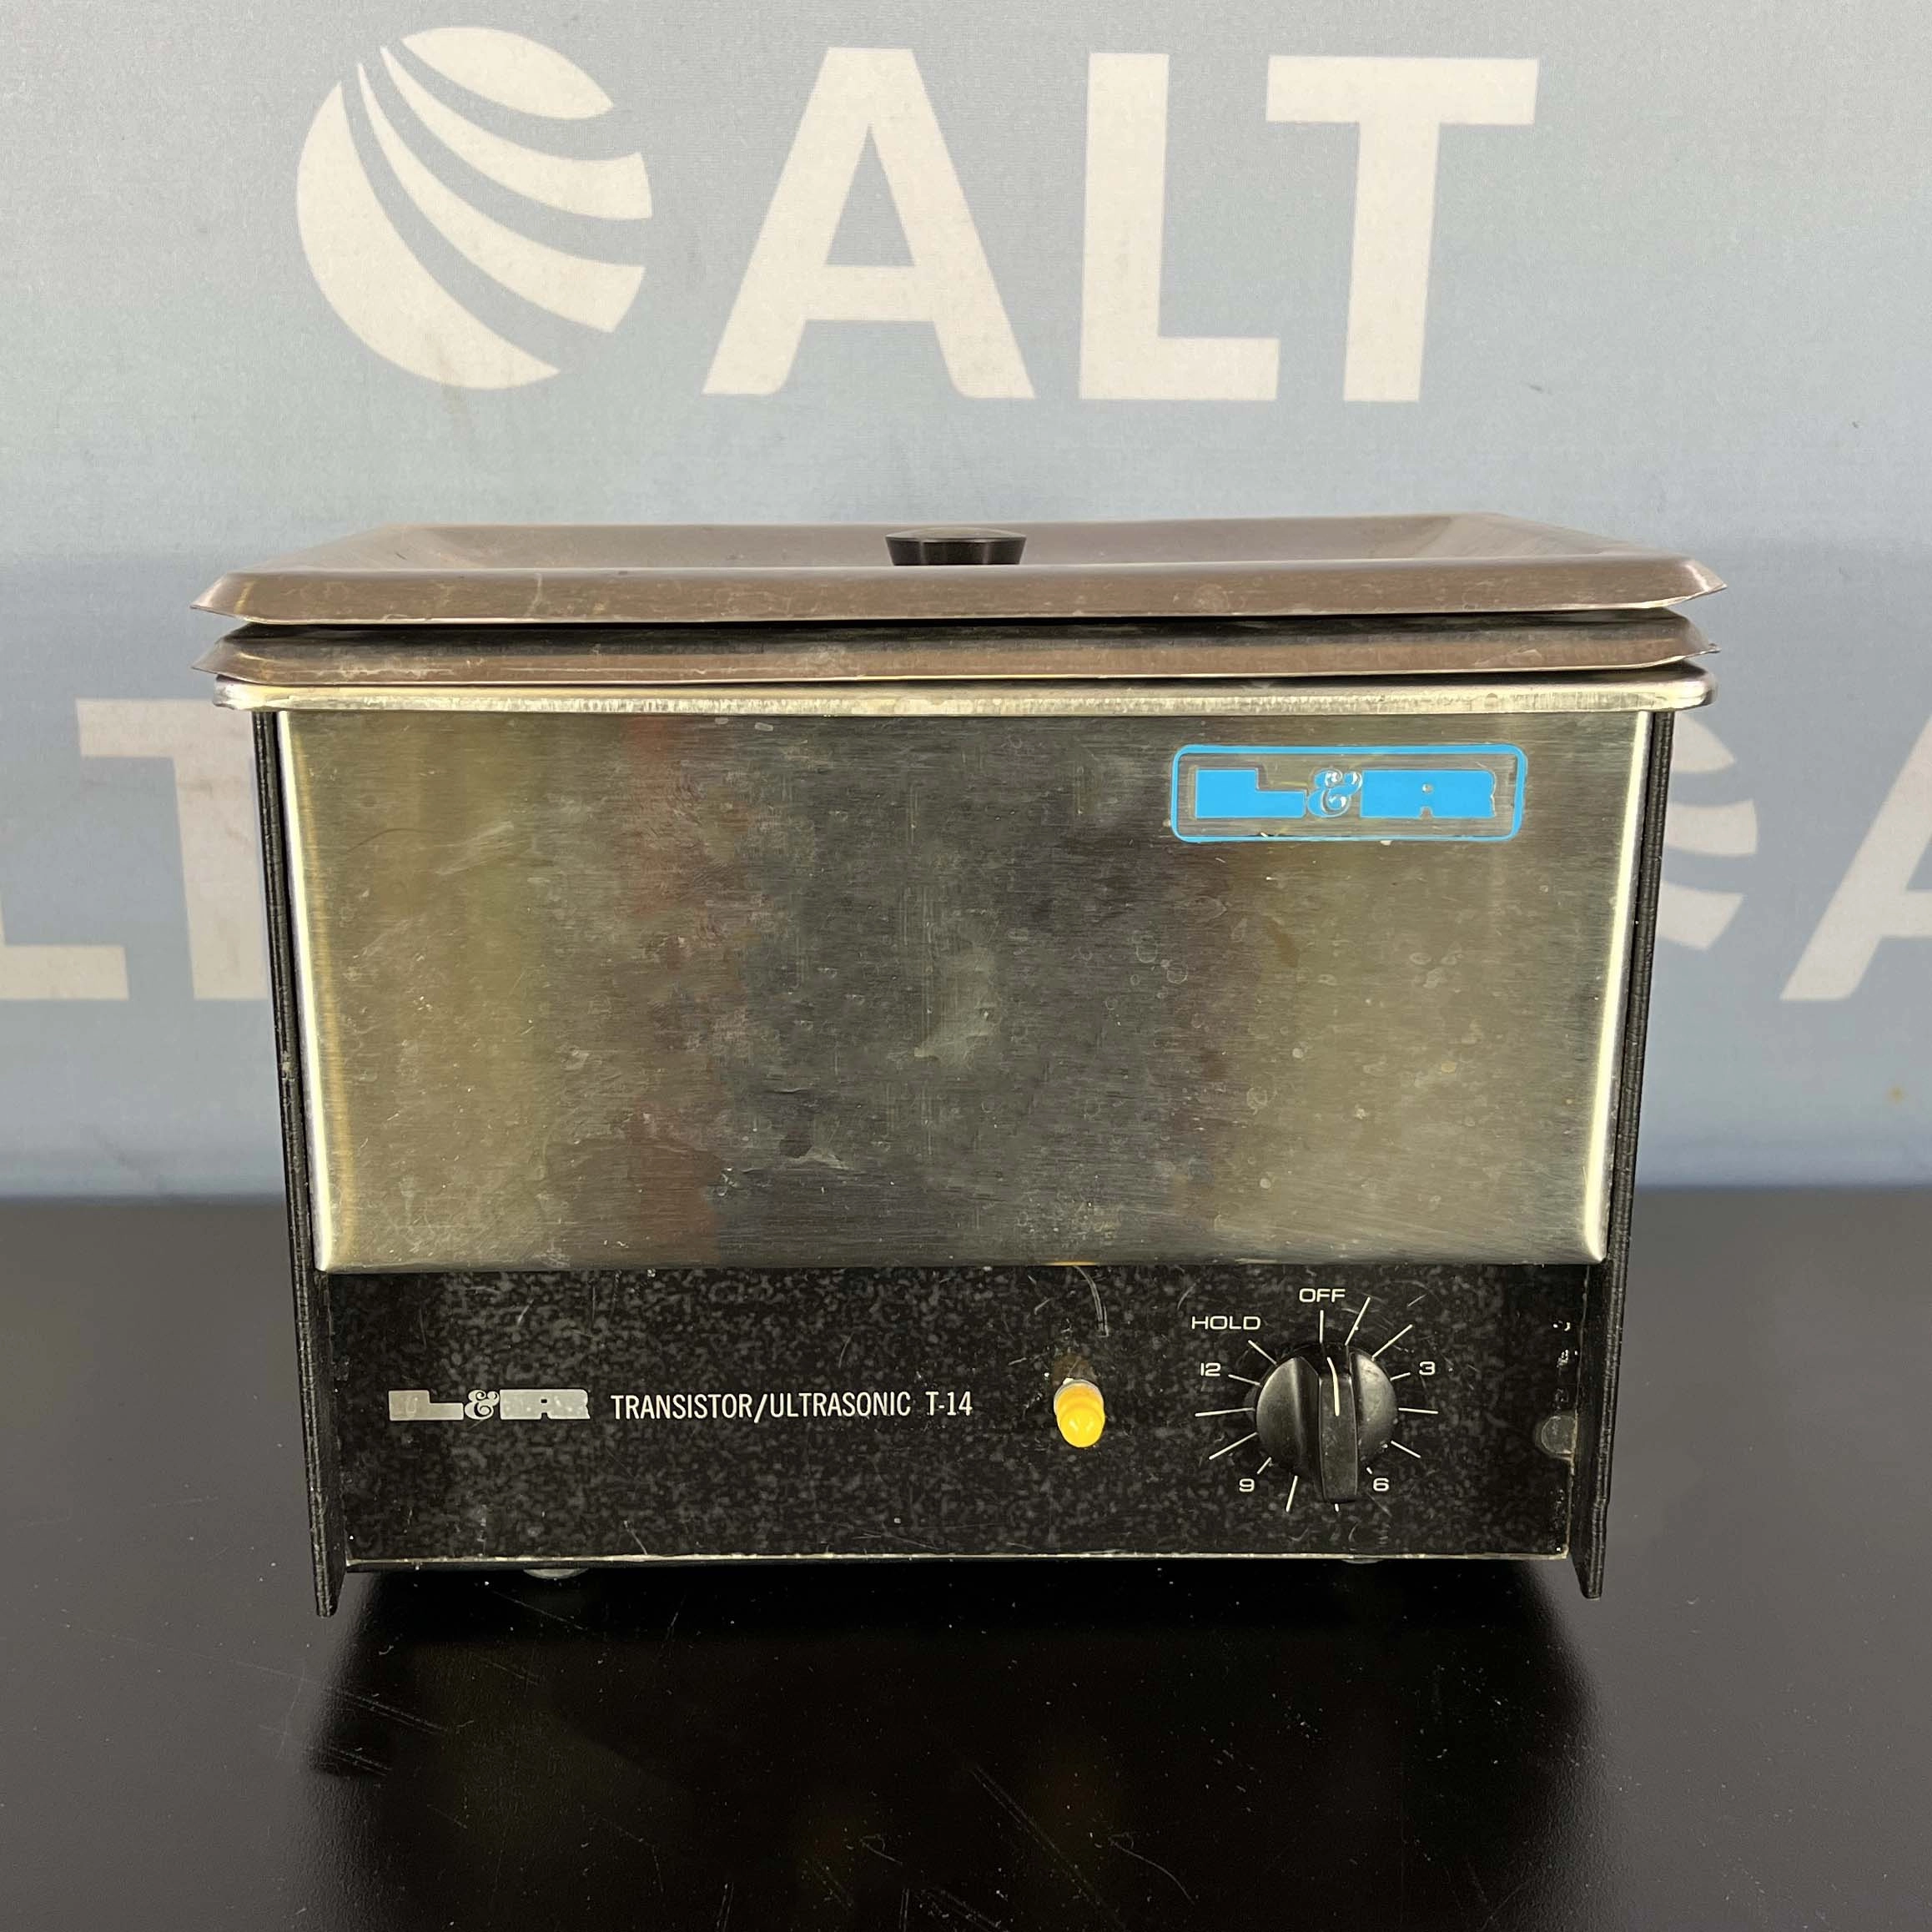 L&amp;R Manufacturing Company T-14 Ultrasonic Cleaner